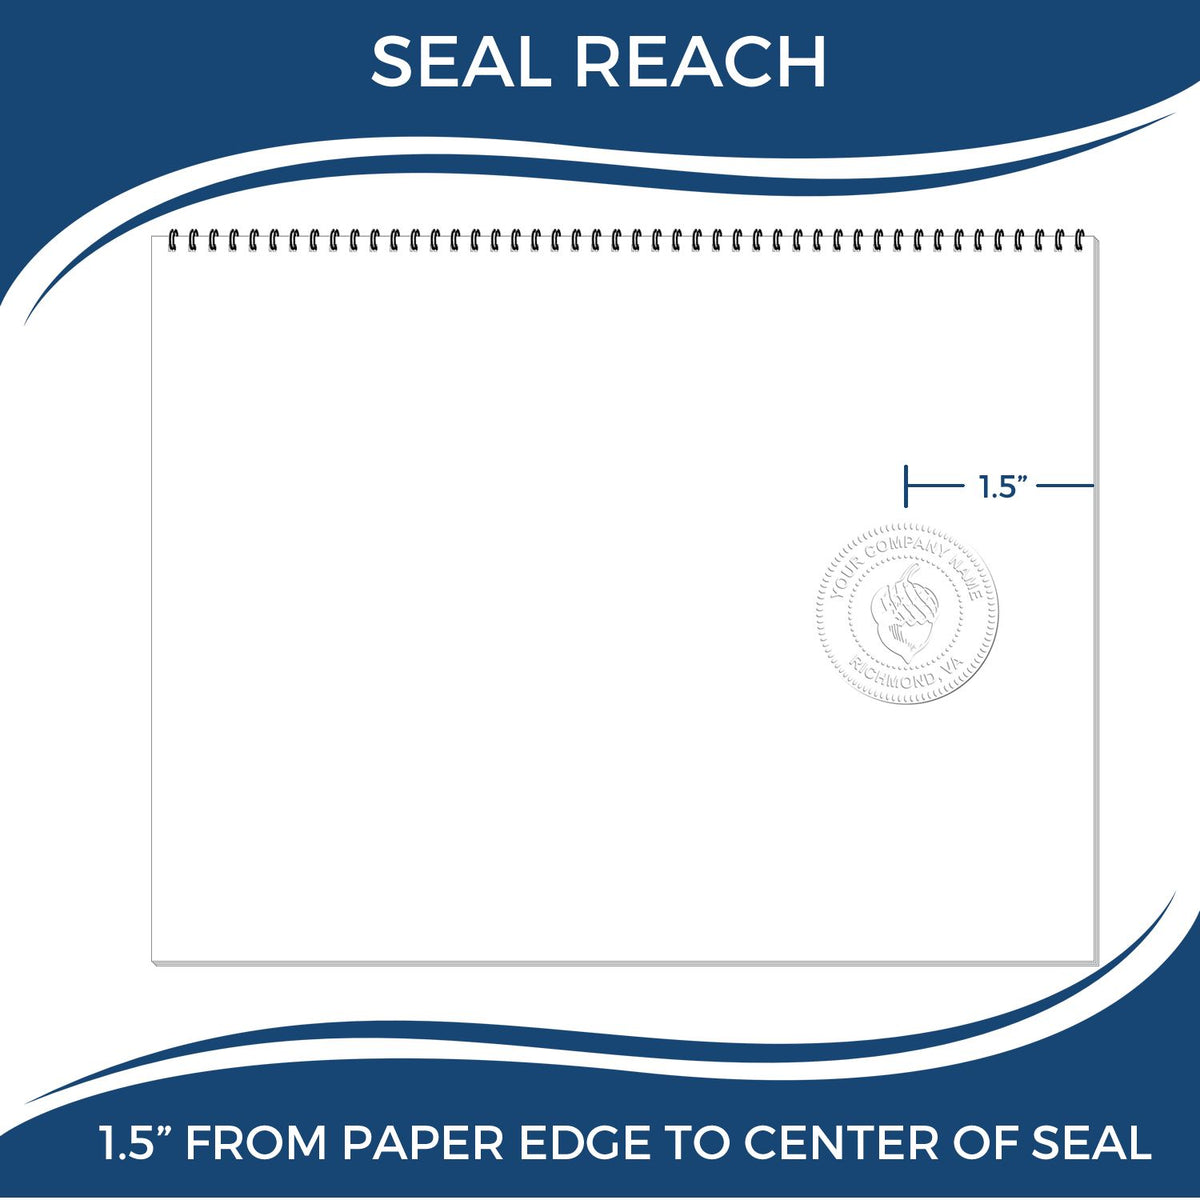 An infographic showing the seal reach which is represented by a ruler and a miniature seal image of the Hybrid Nebraska Engineer Seal